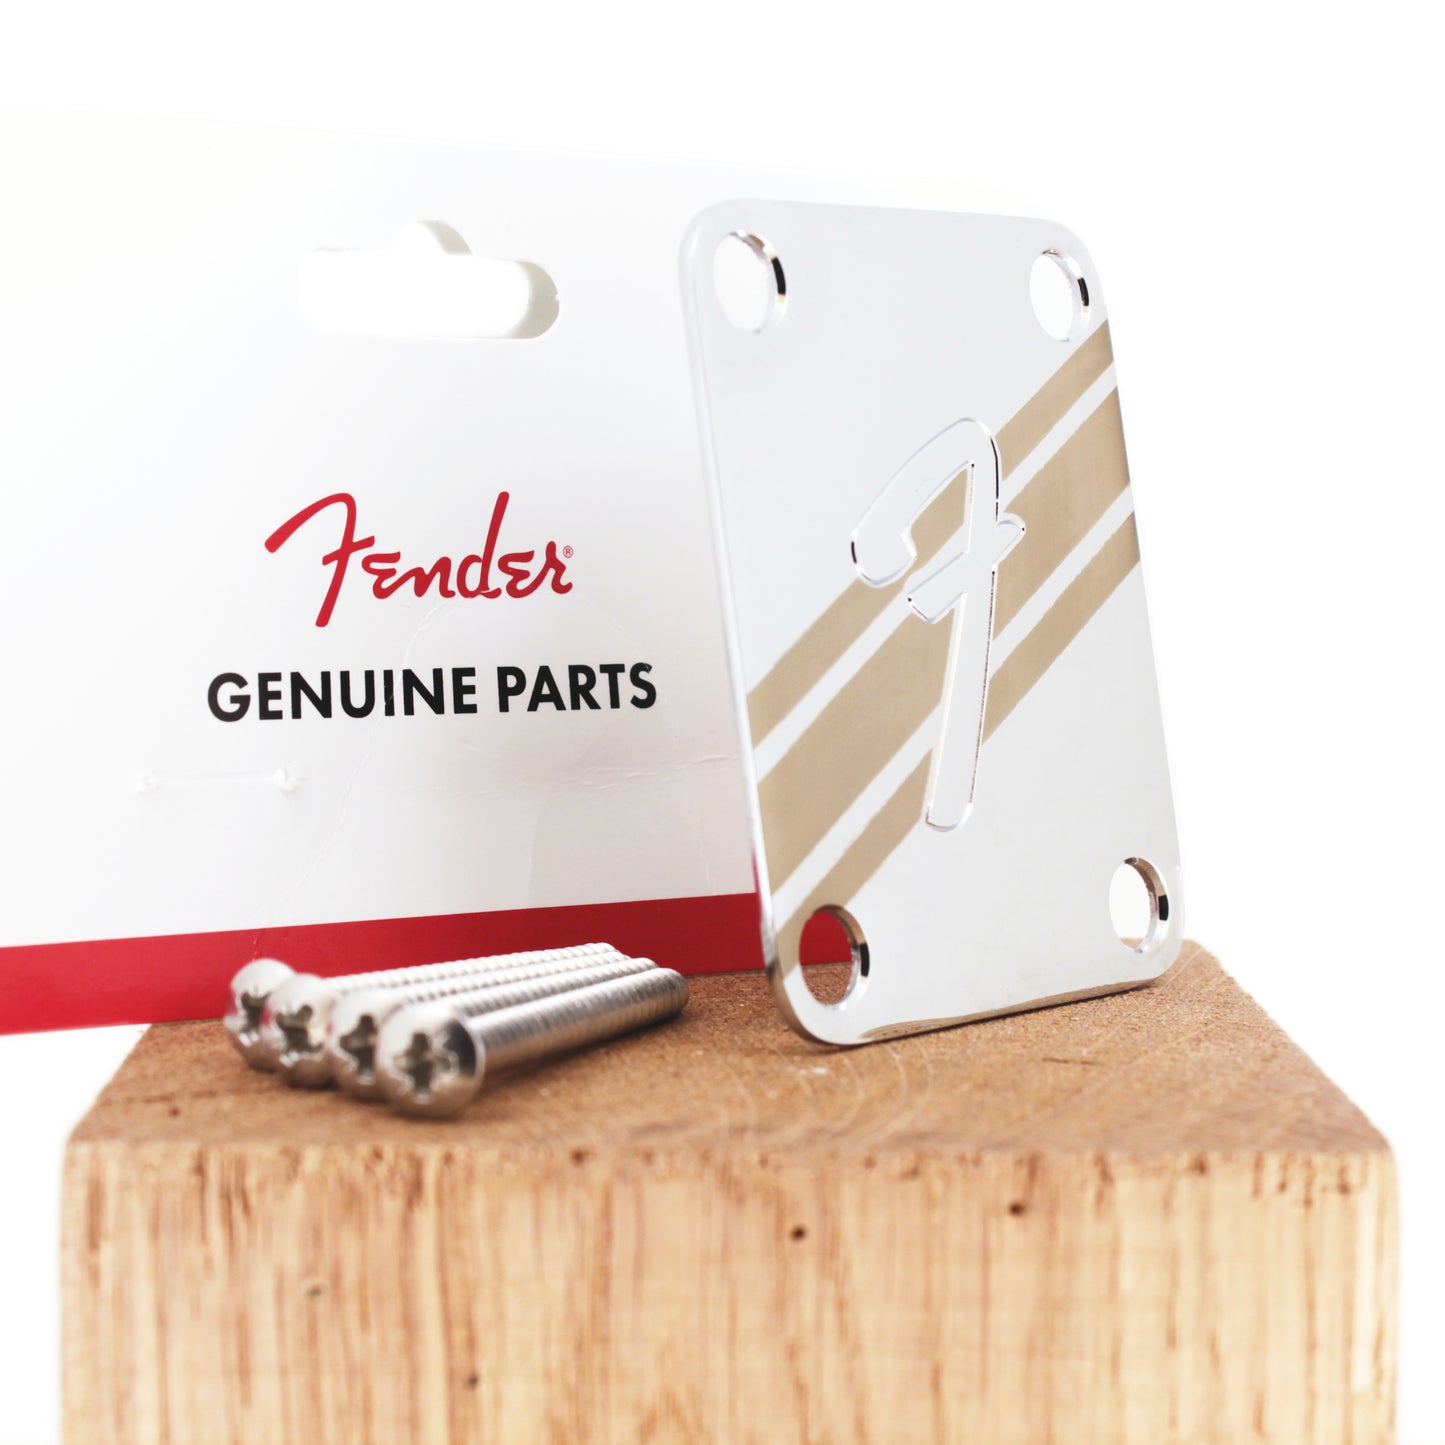 Guitar neck plate - Competition edition - Fender genuine upgrade